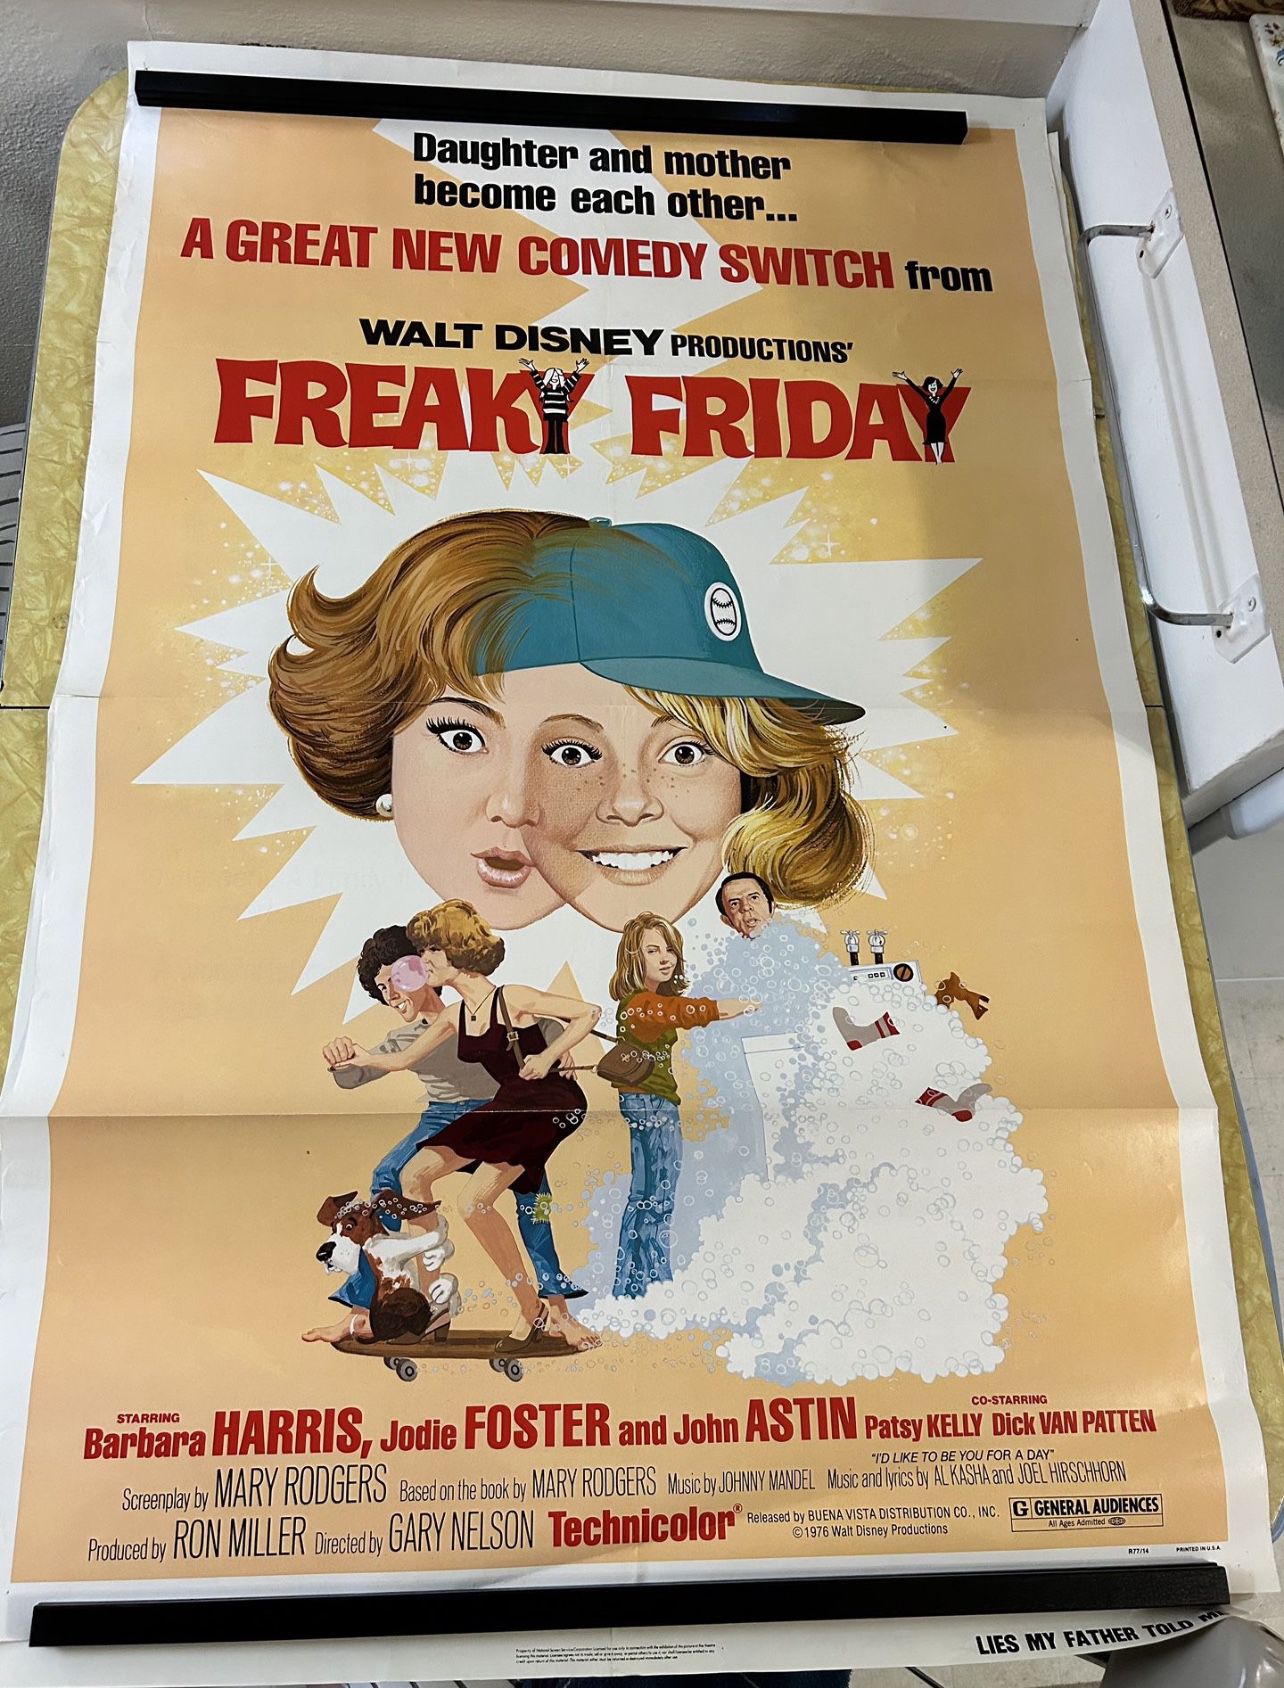 Authentic Movie Poster 27x41 Freaky Friday Disney (from The Bagdad!)